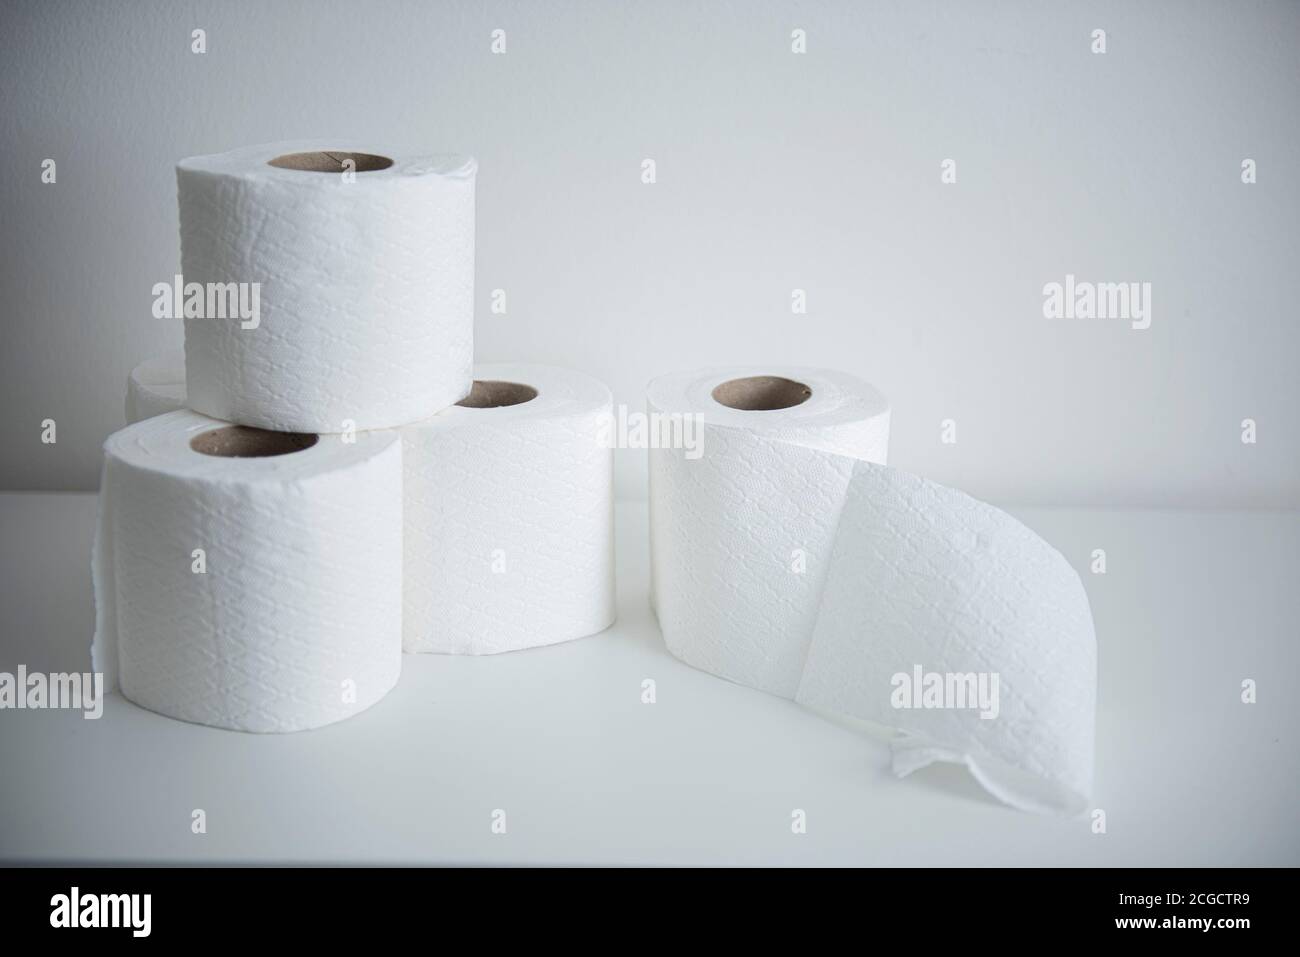 Stacked rolls of toilet paper Stock Photo - Alamy